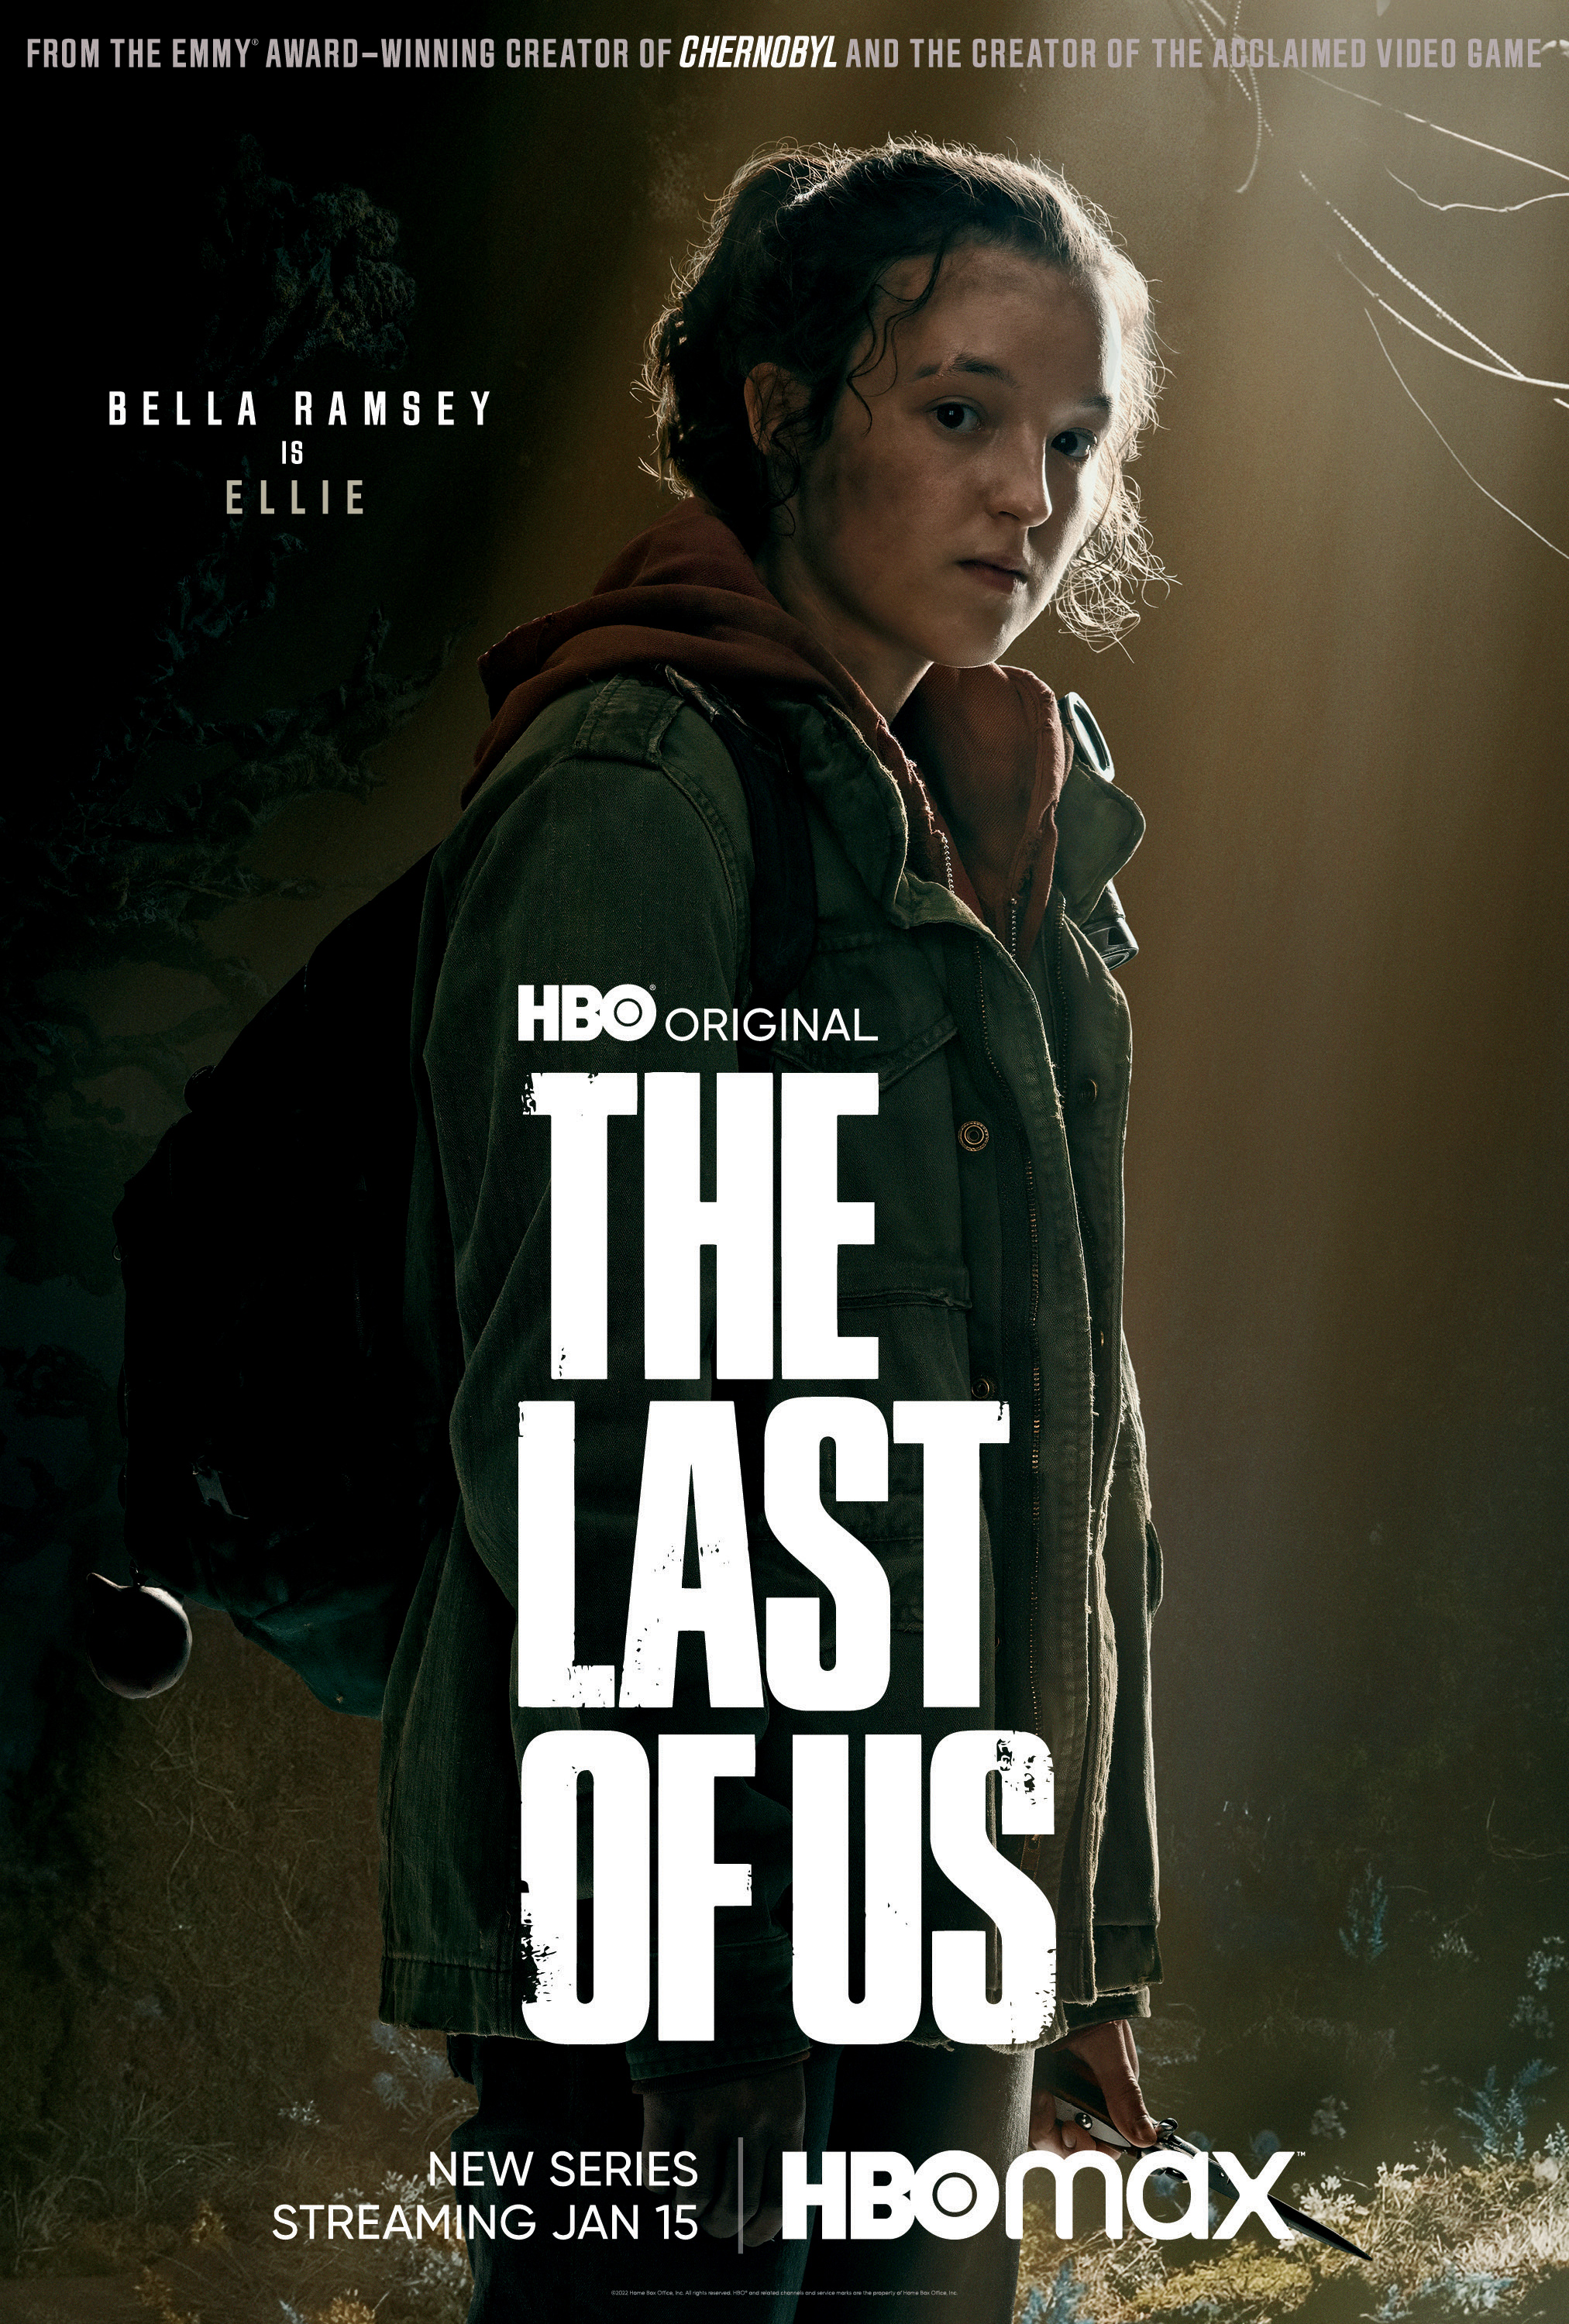 The Last of Us Leaked on Tamilrockers & Telegram Channels for Free Download  and Watch Online; Pedro Pascal, Bella Ramsey's Horror Series Is the Latest  Victim of Piracy?